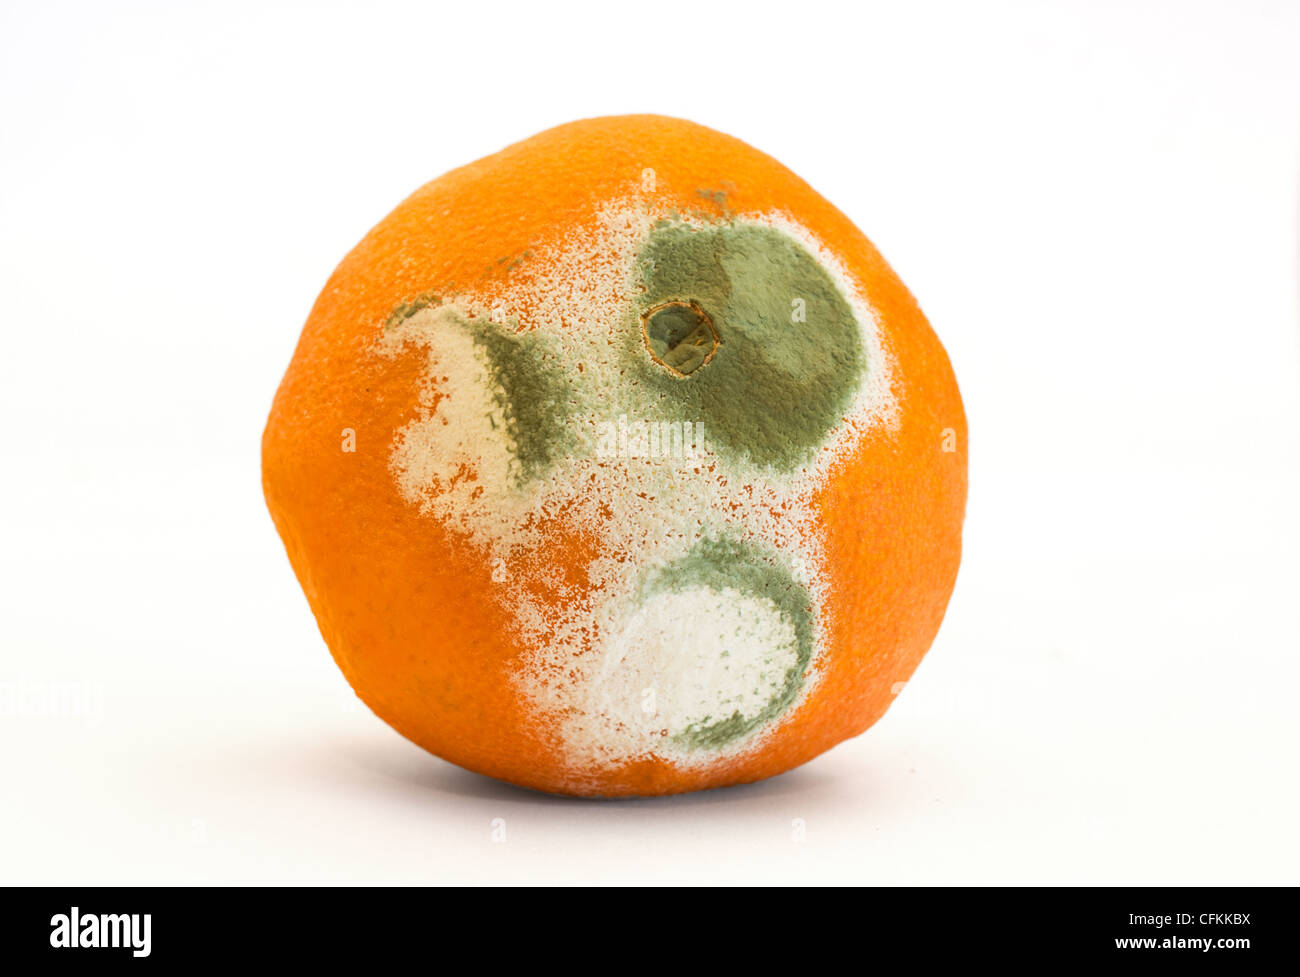 An orange, covered with grey and green mold Stock Photo